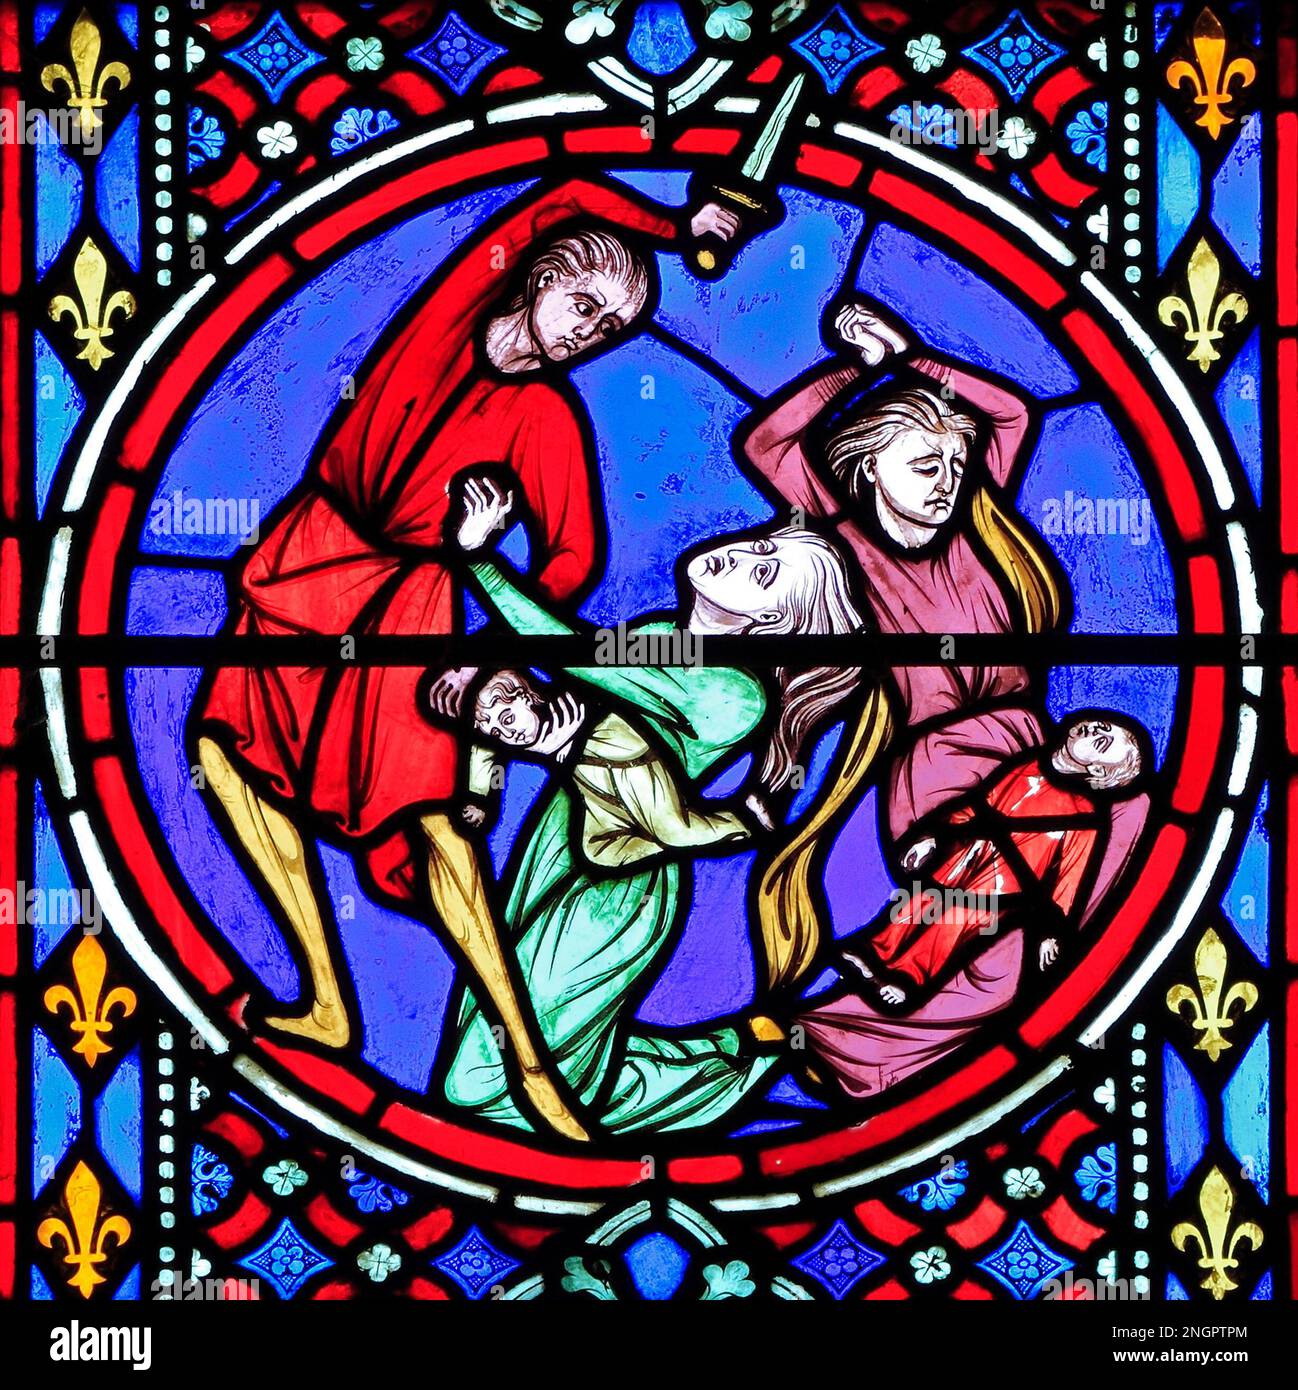 Nativity Window, stained glass by Oudinot of Paris, 1861, Feltwell Church, Norfolk, Slaughter of the Innocents, Herod orders killing of infant boys Stock Photo